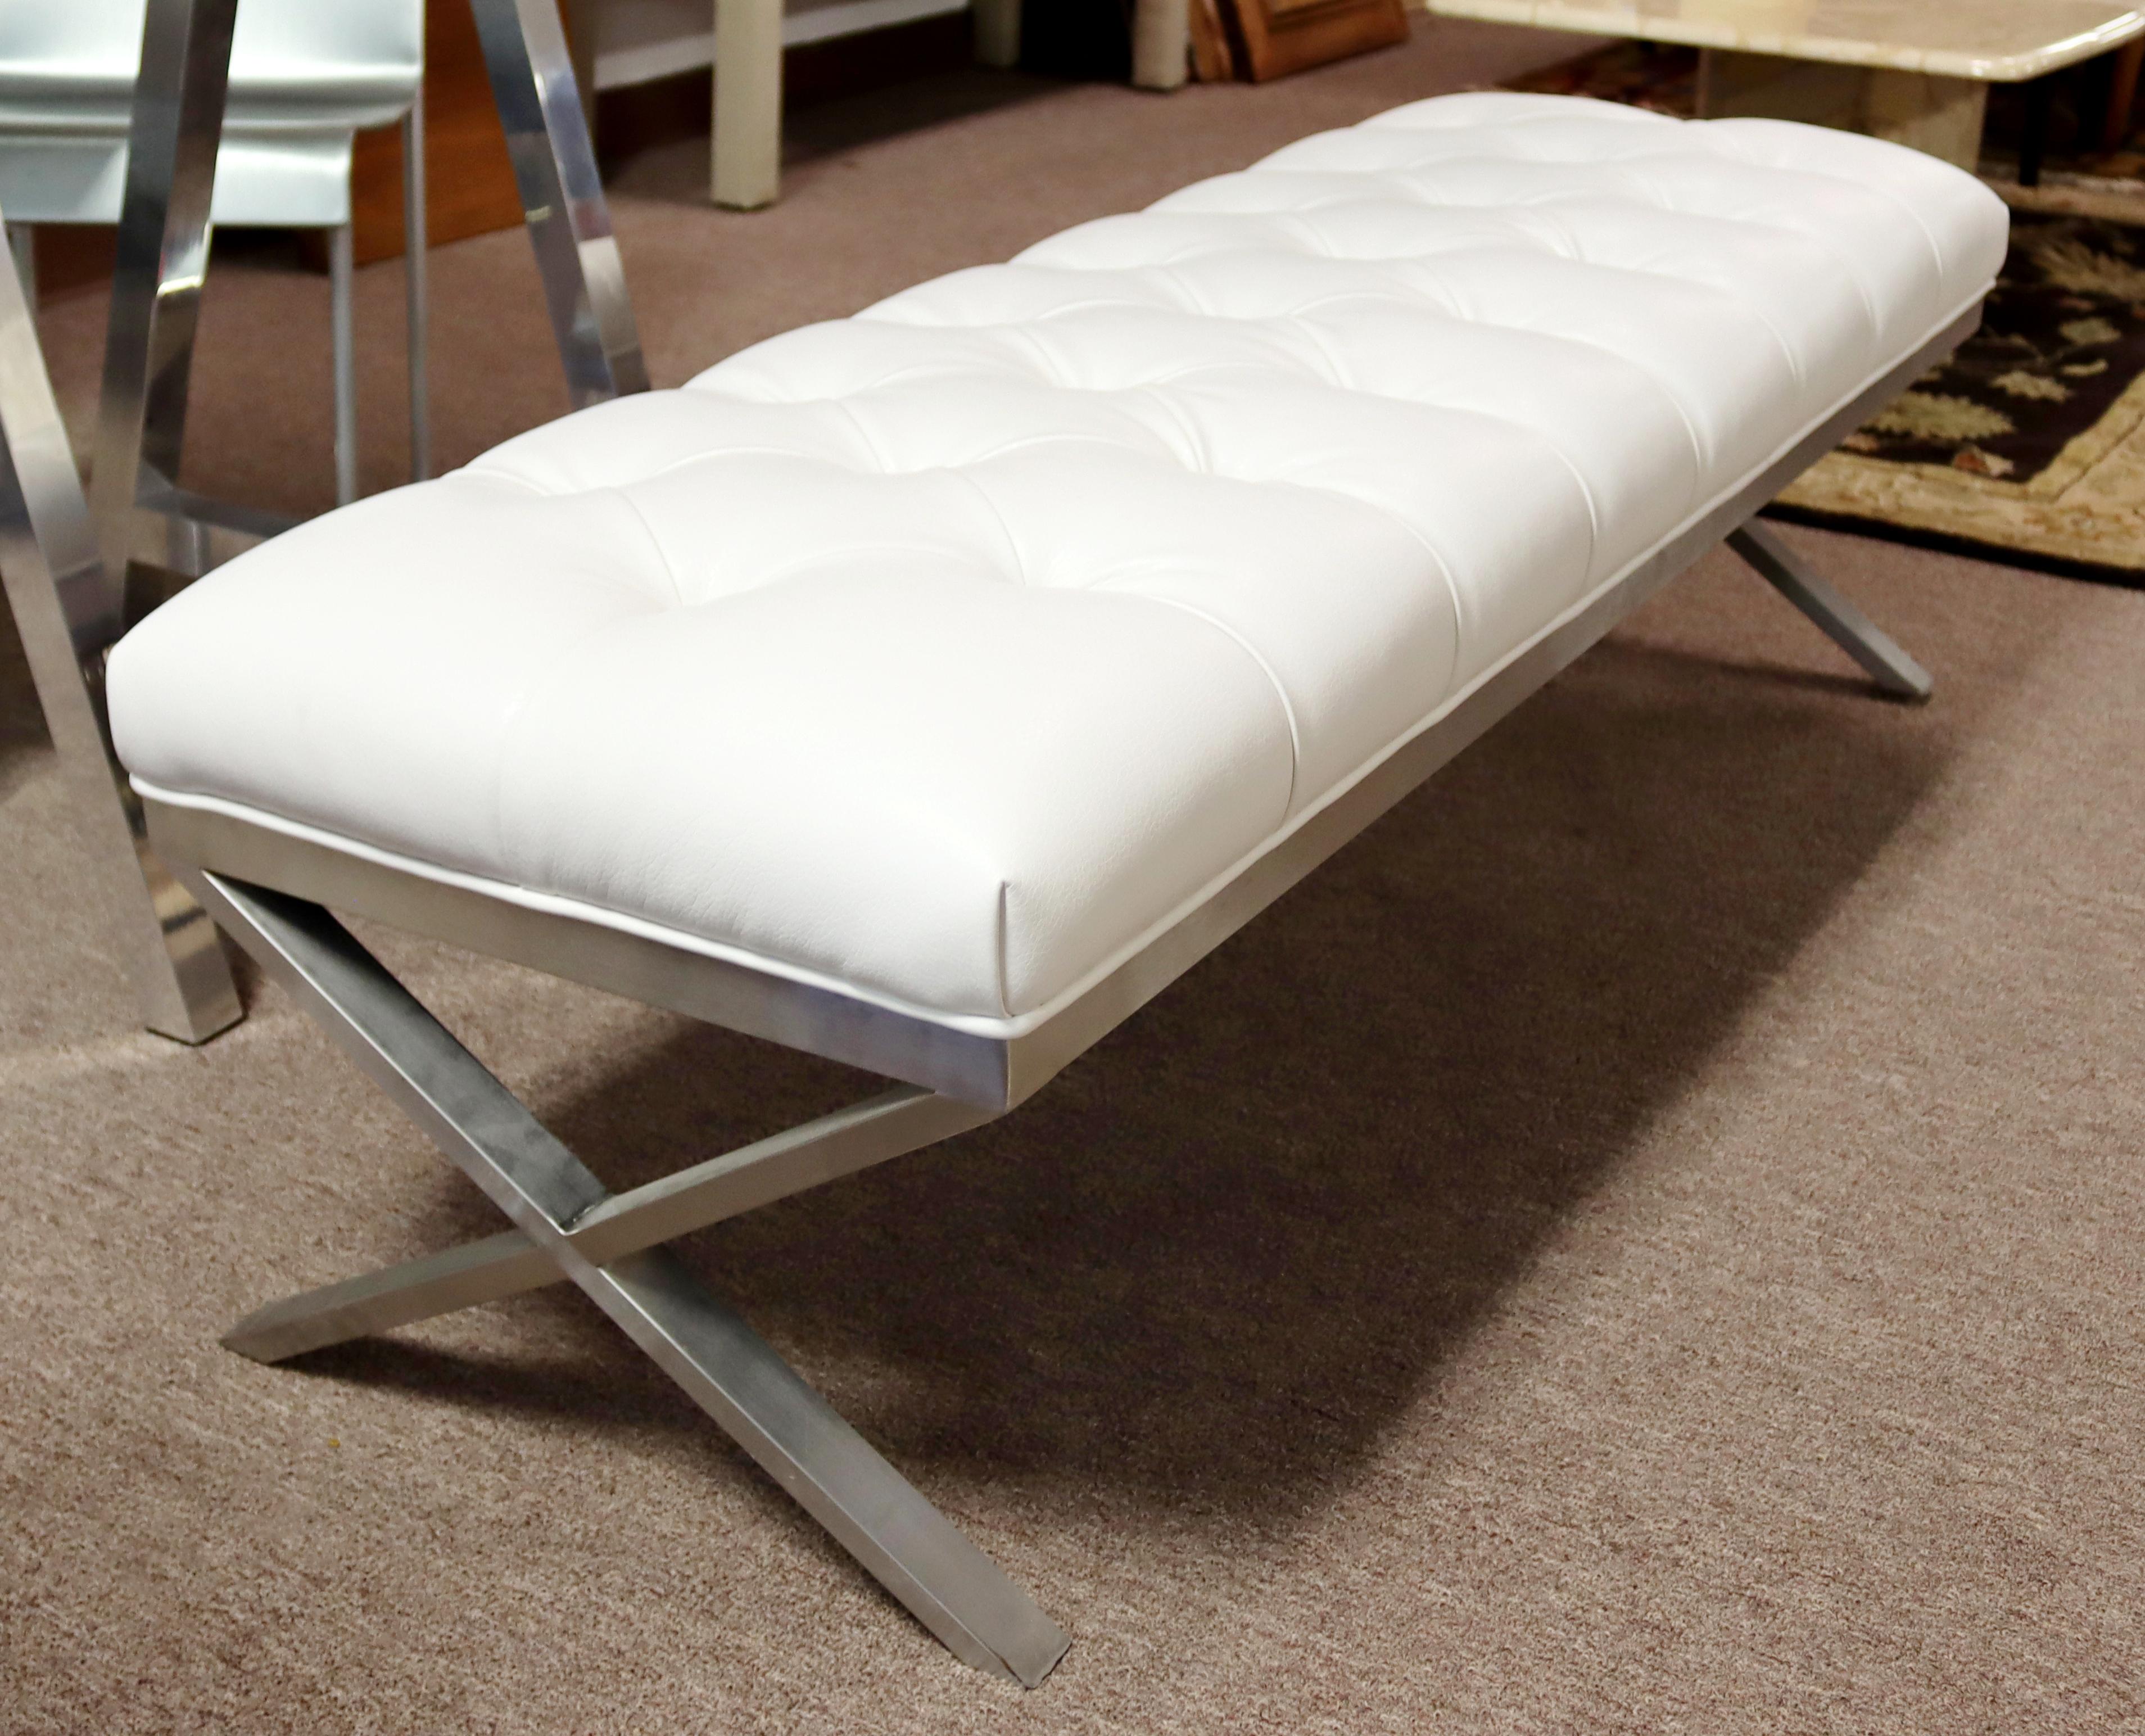 20th Century Contemporary Modernist Tufted White Vinyl on Chrome Bench Seat